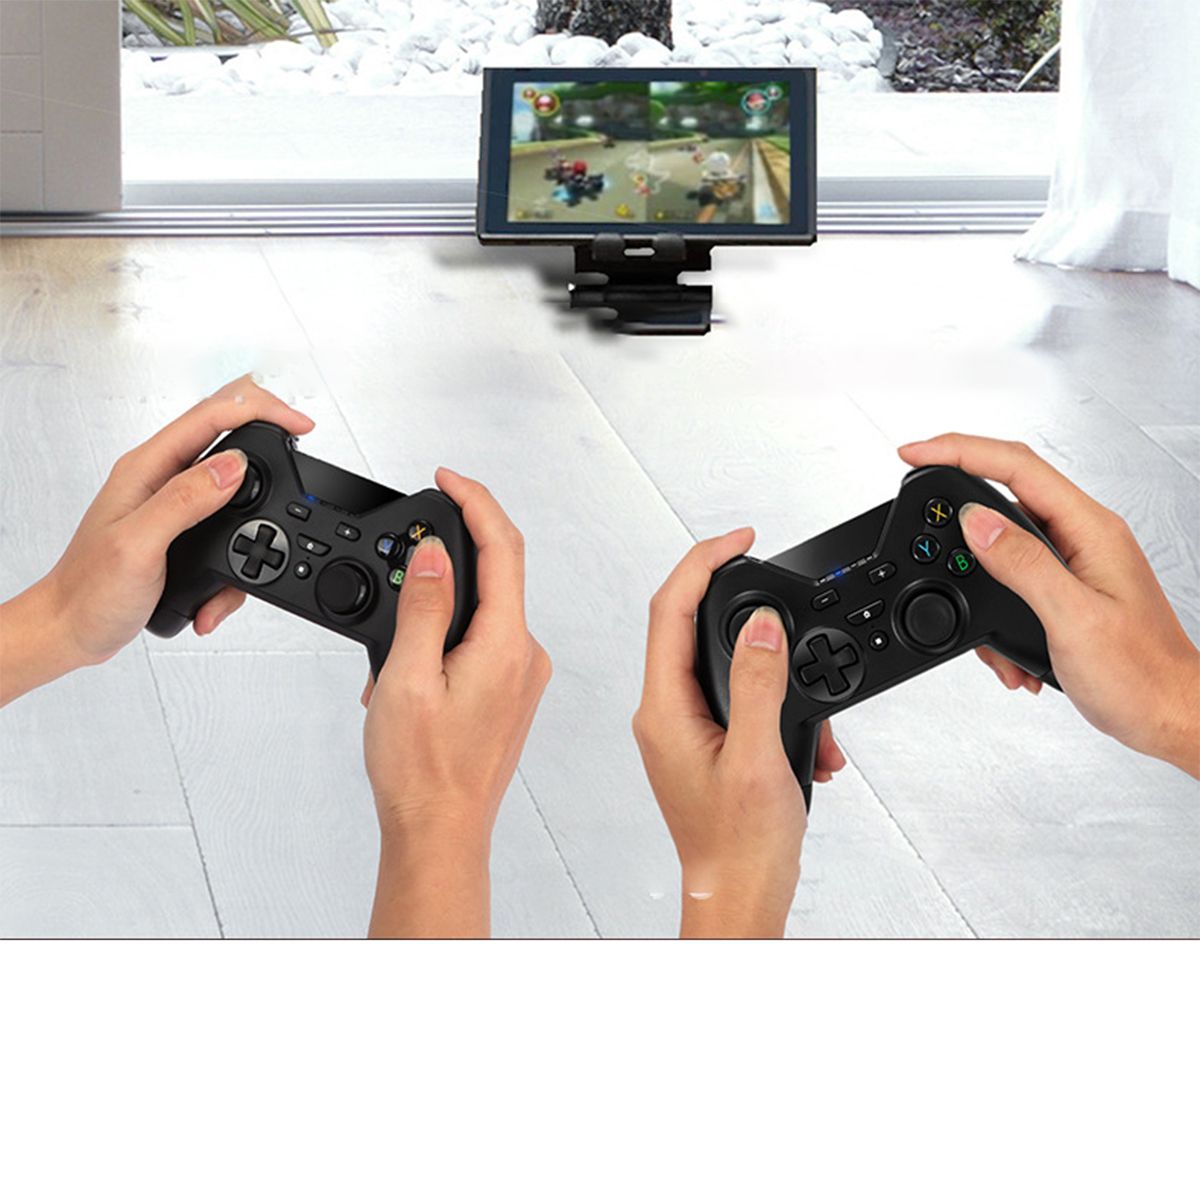 Wireless-Bluetooth-Game-Controller-Gamepad-Support-Turbo-Gyro-Axis-Vibration-Feedback-for-Nintendo-S-1749113